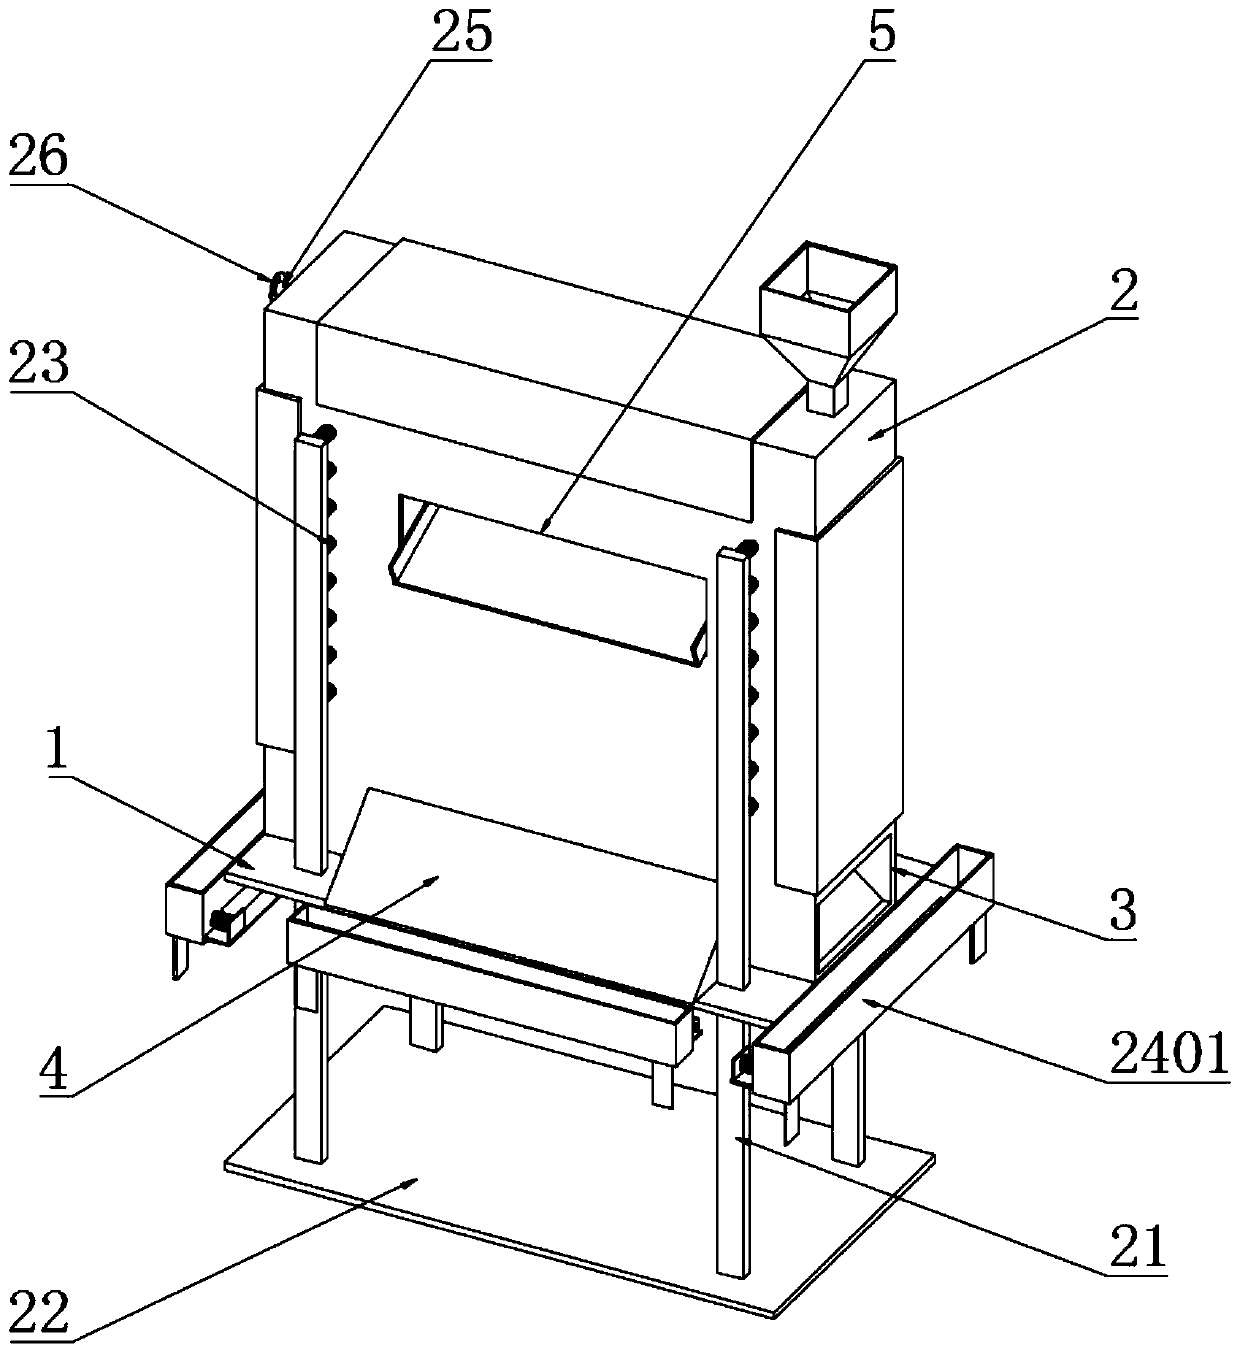 Automatic protection type sandstone sorting and collecting integration device for mechanical engineering